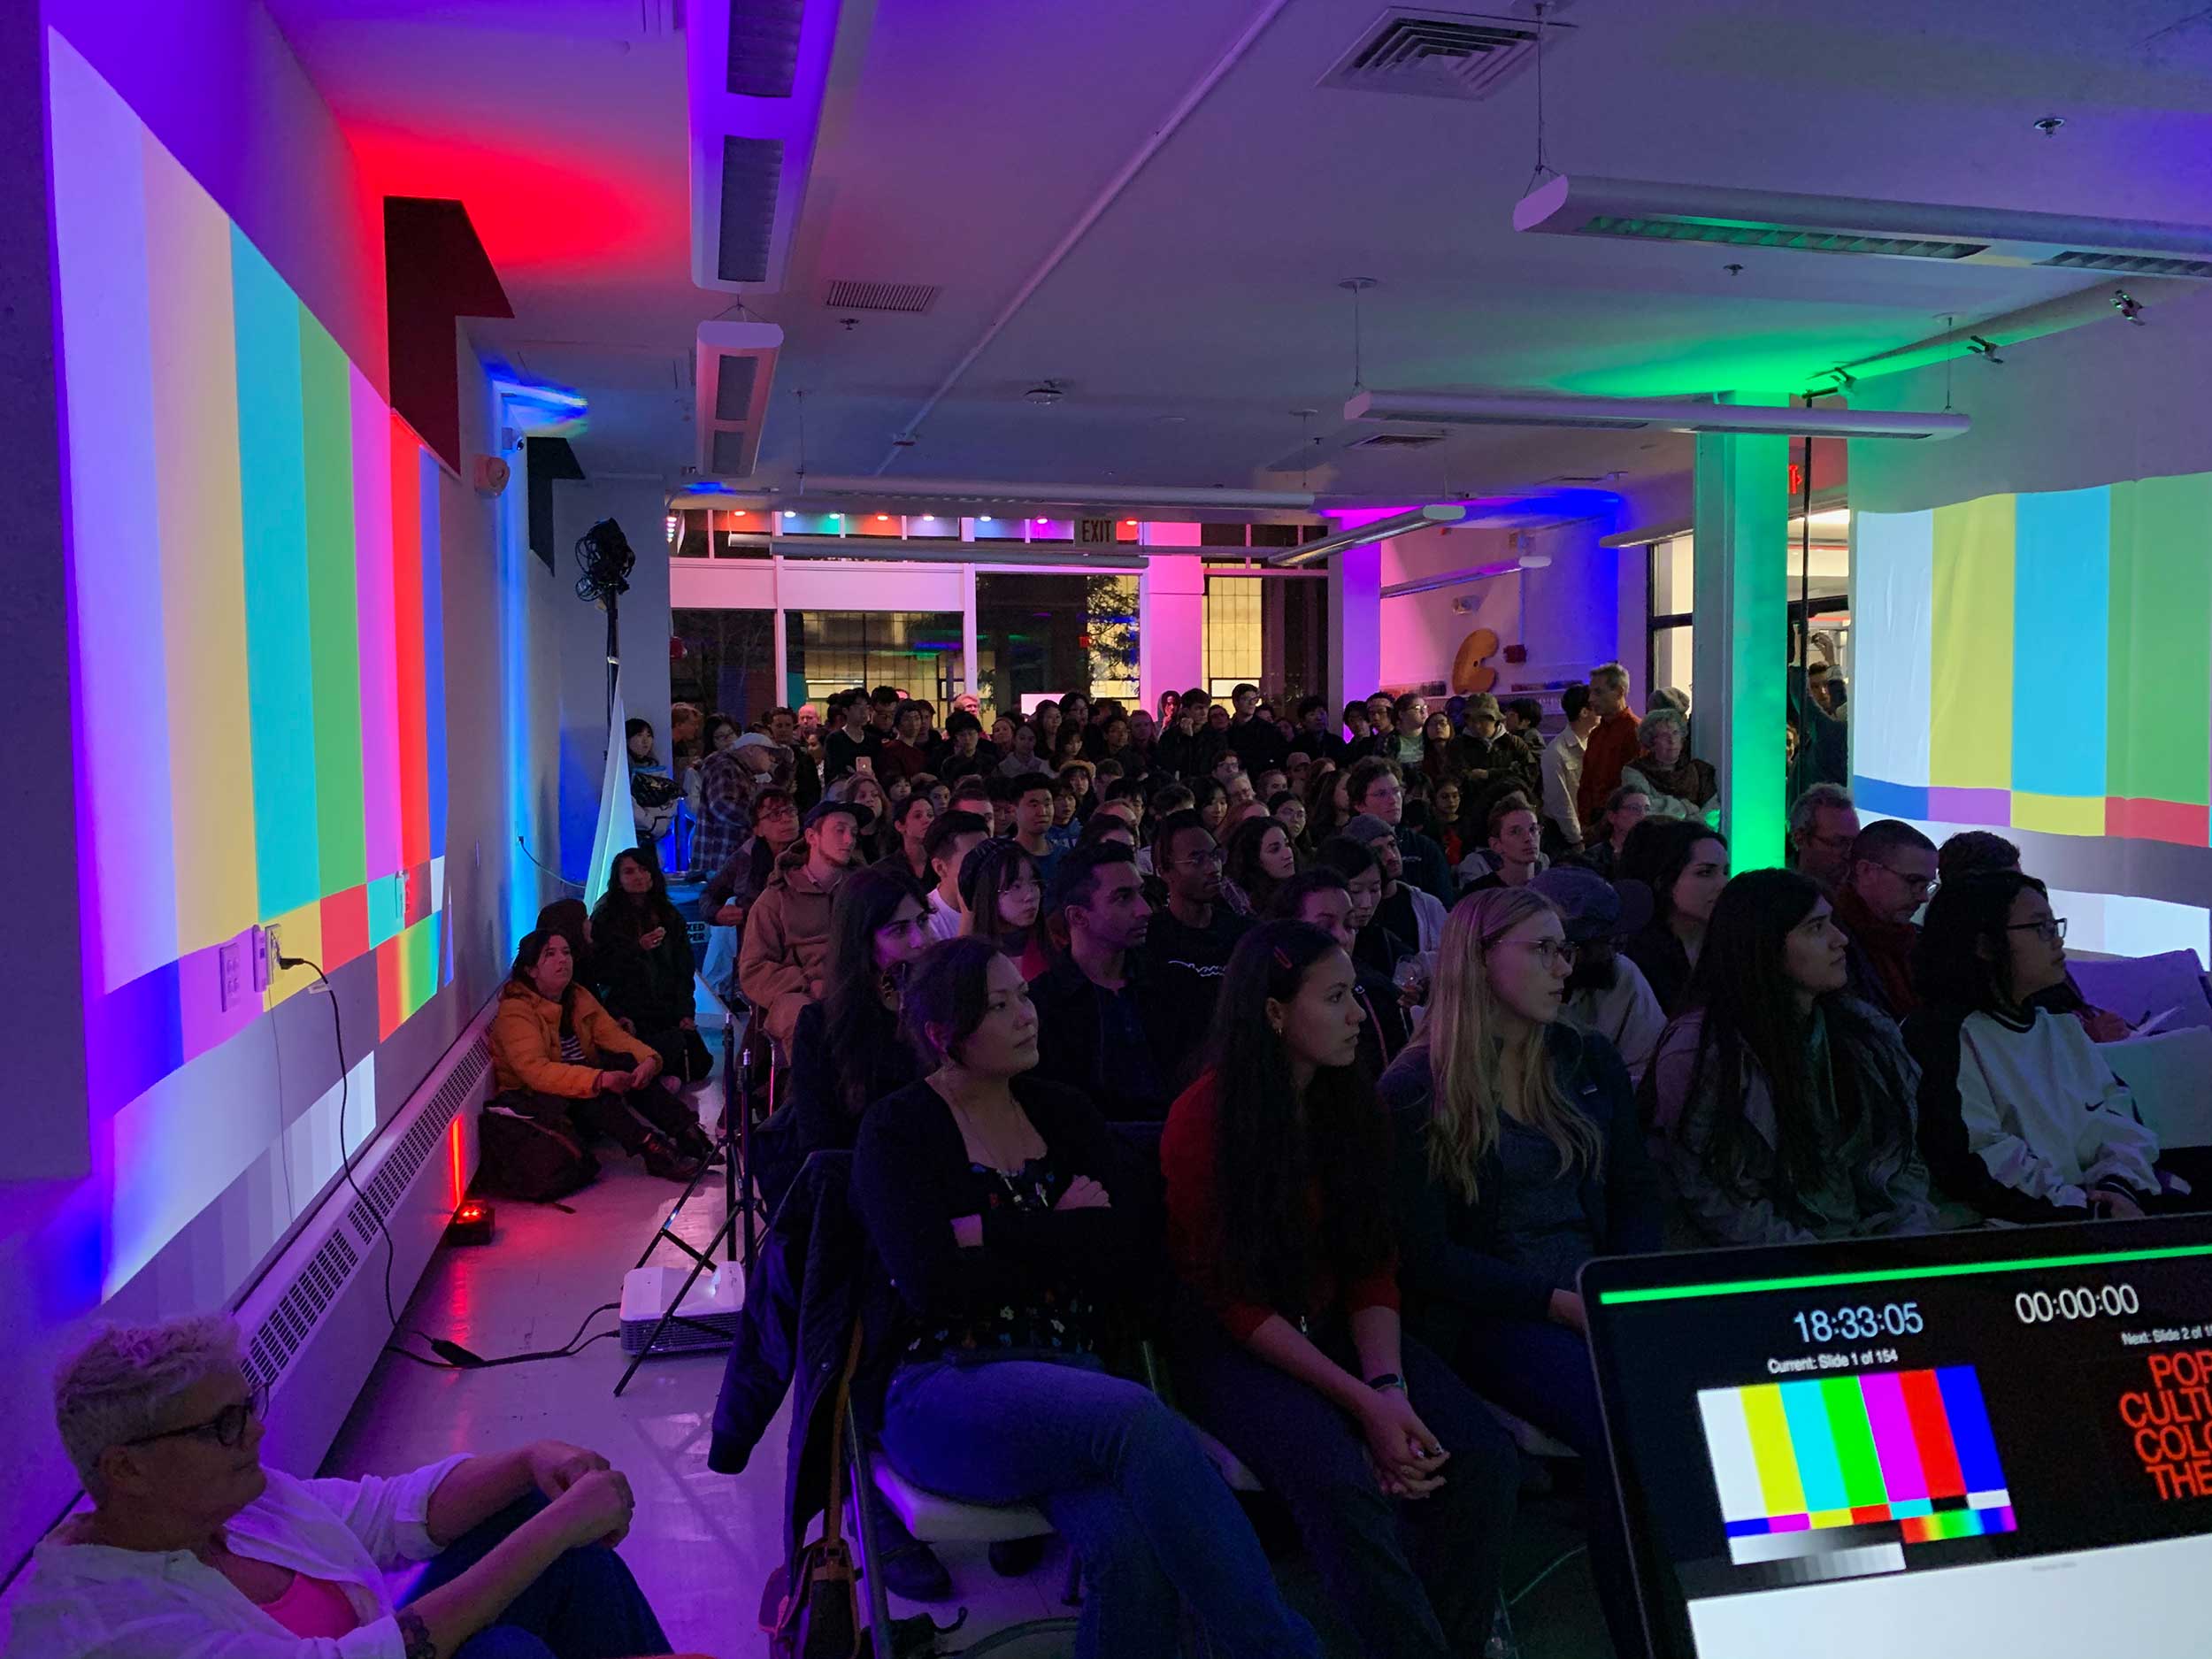 A crowded lecture with multi-colored test pattern projections on both side walls and colored lights in the background